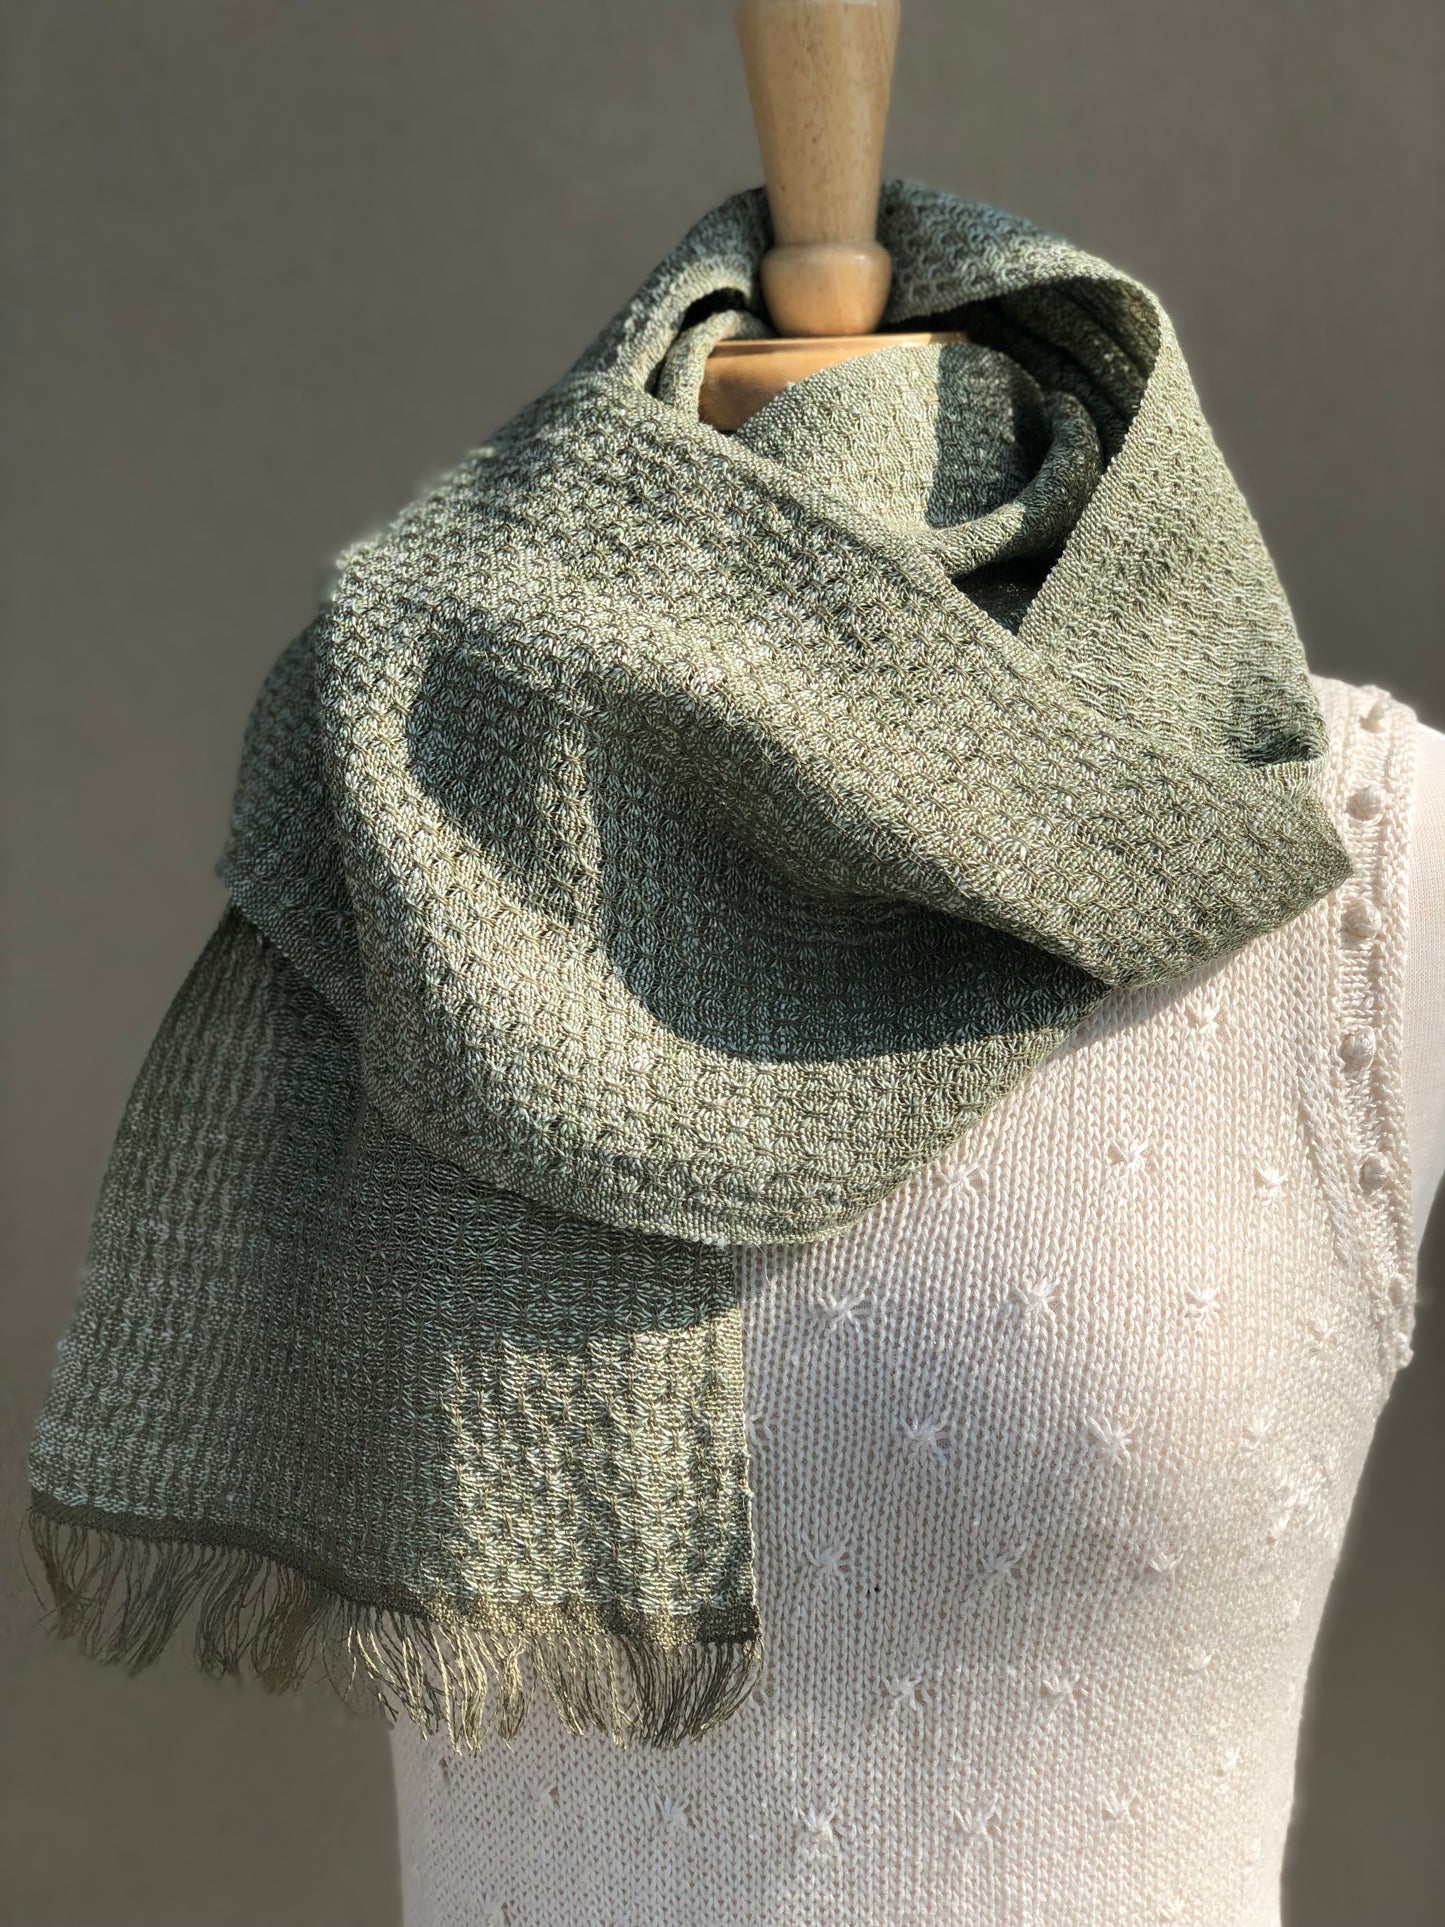 Soft Cell Huck Scarf or Cowl - Pattern and Yarn Kit